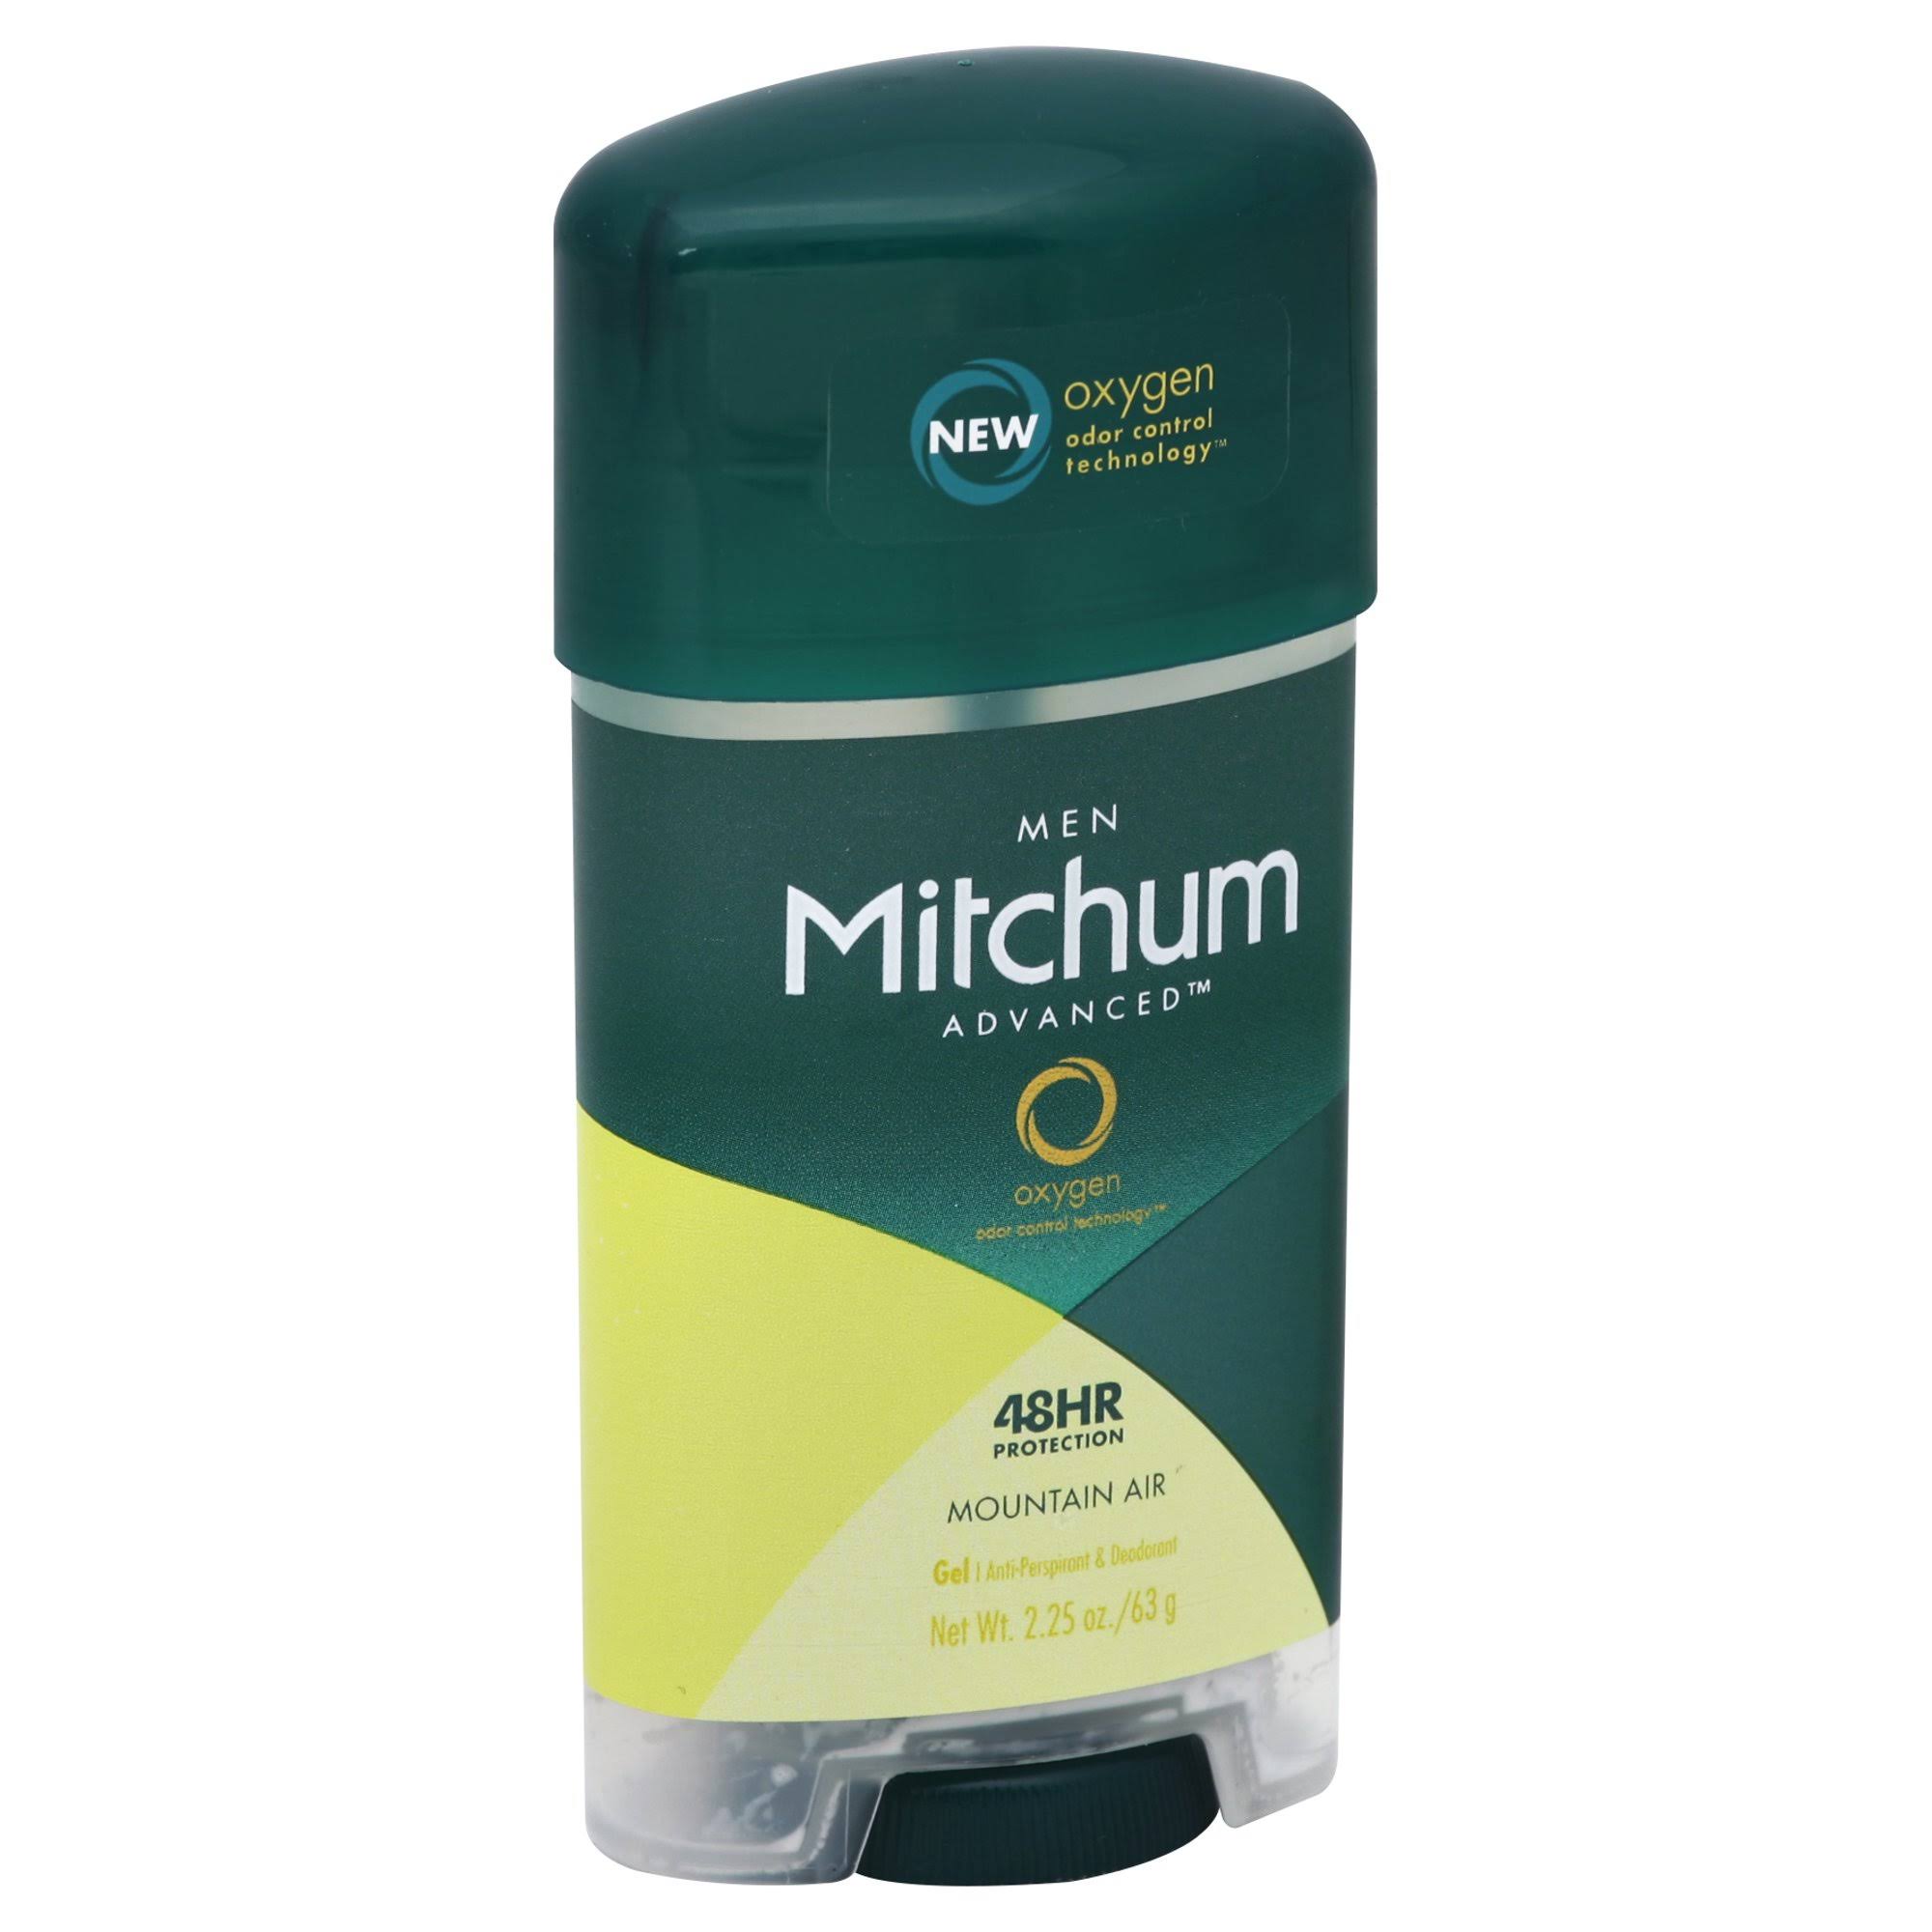 Mitchum Clear Gel Antiperspirant and Deodorant Mountain Air Scent - 2.25oz